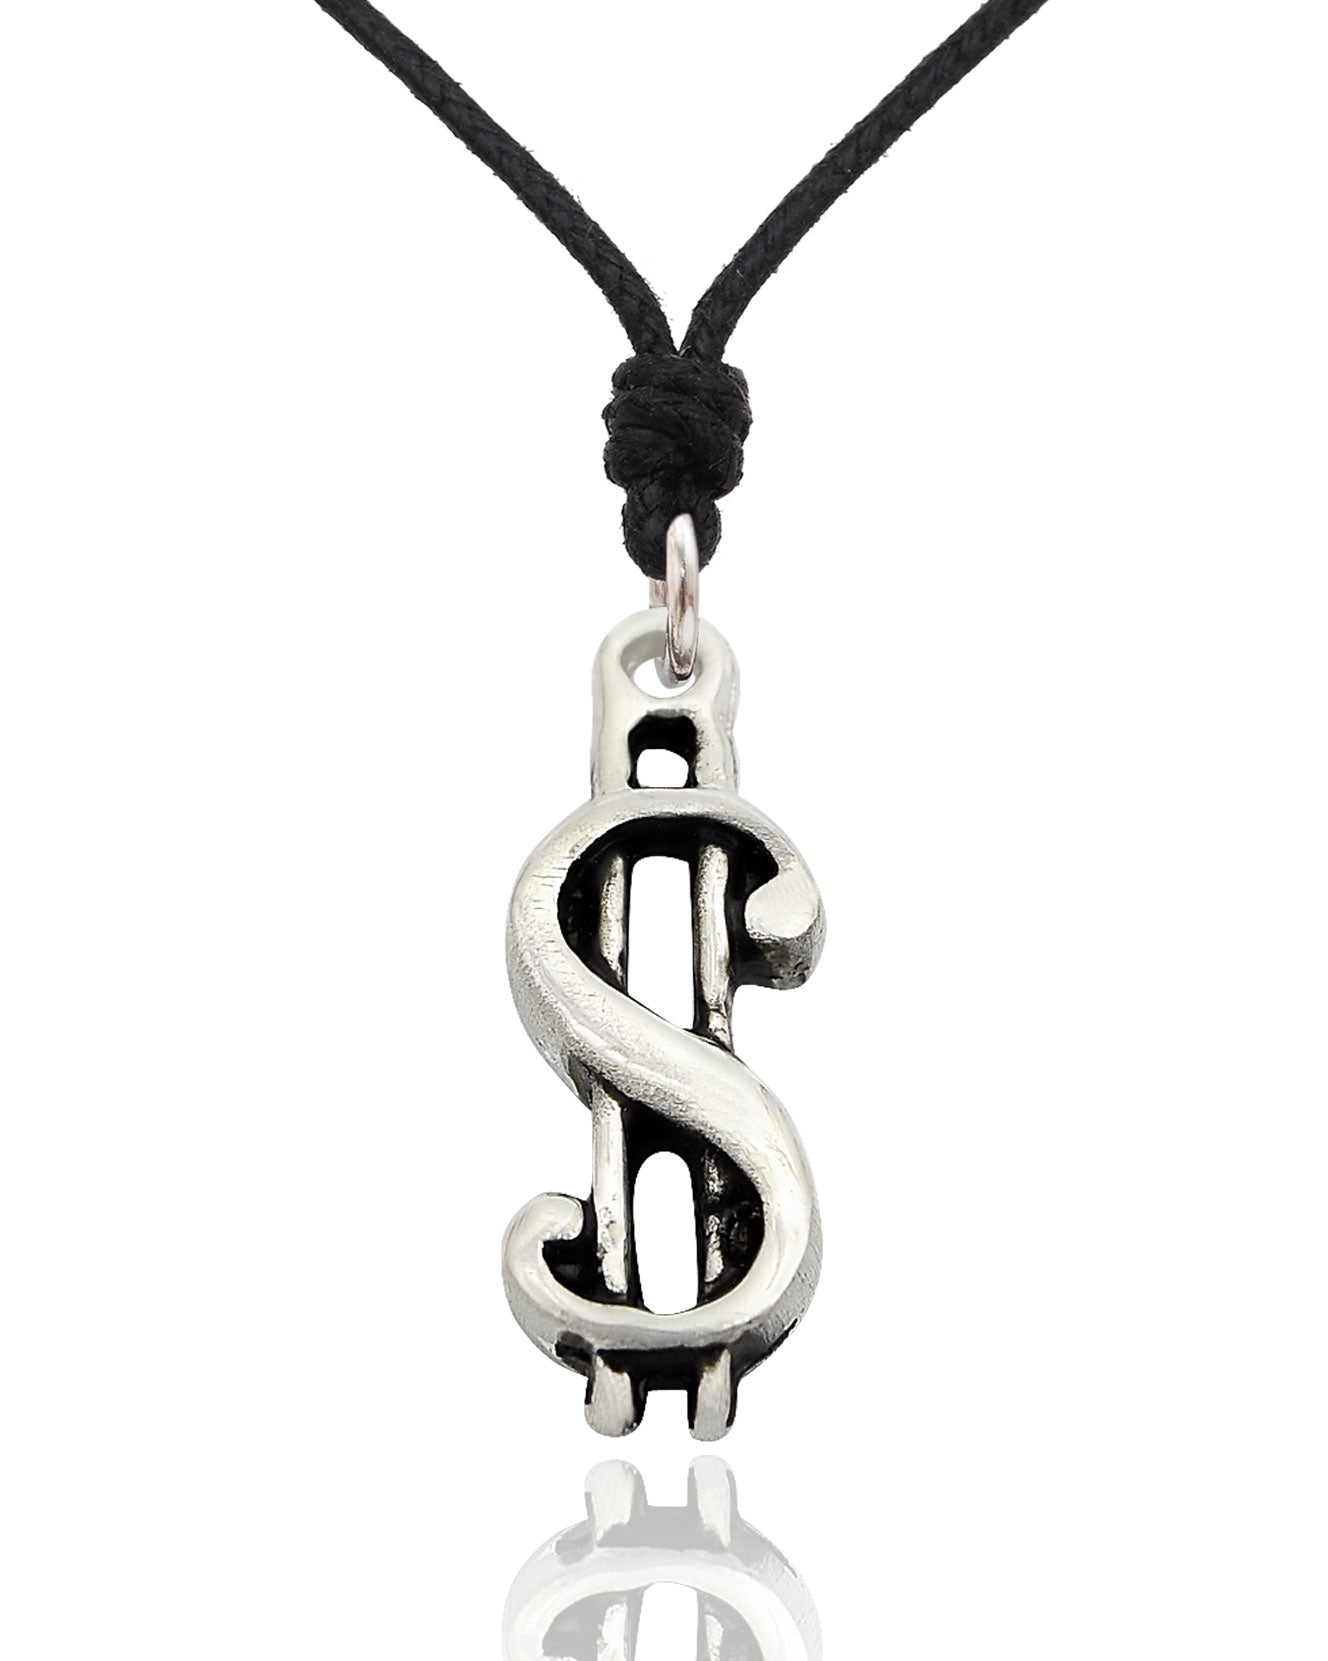 Dollar Bill Symbol Silver Pewter Charm Necklace Pendant Jewelry With Cotton Cord